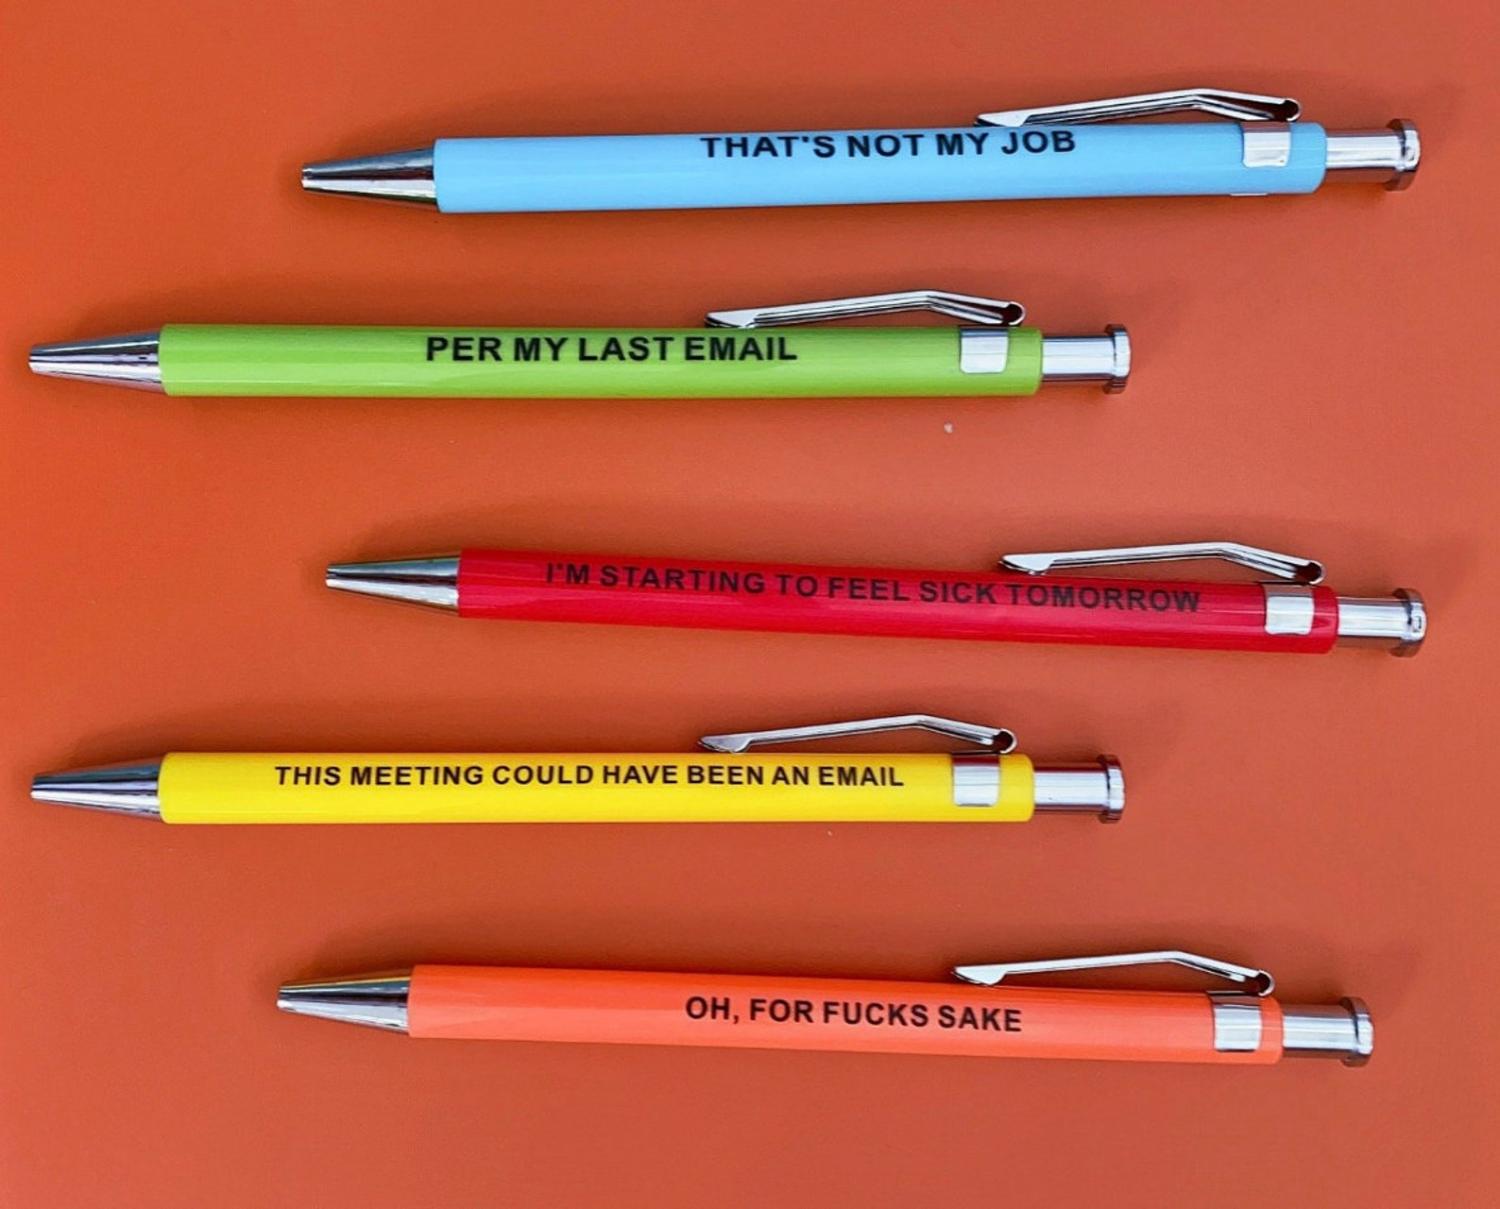 Red, yellow, green, blue, and orange colored Offensive Office Pens on a red-orange surface